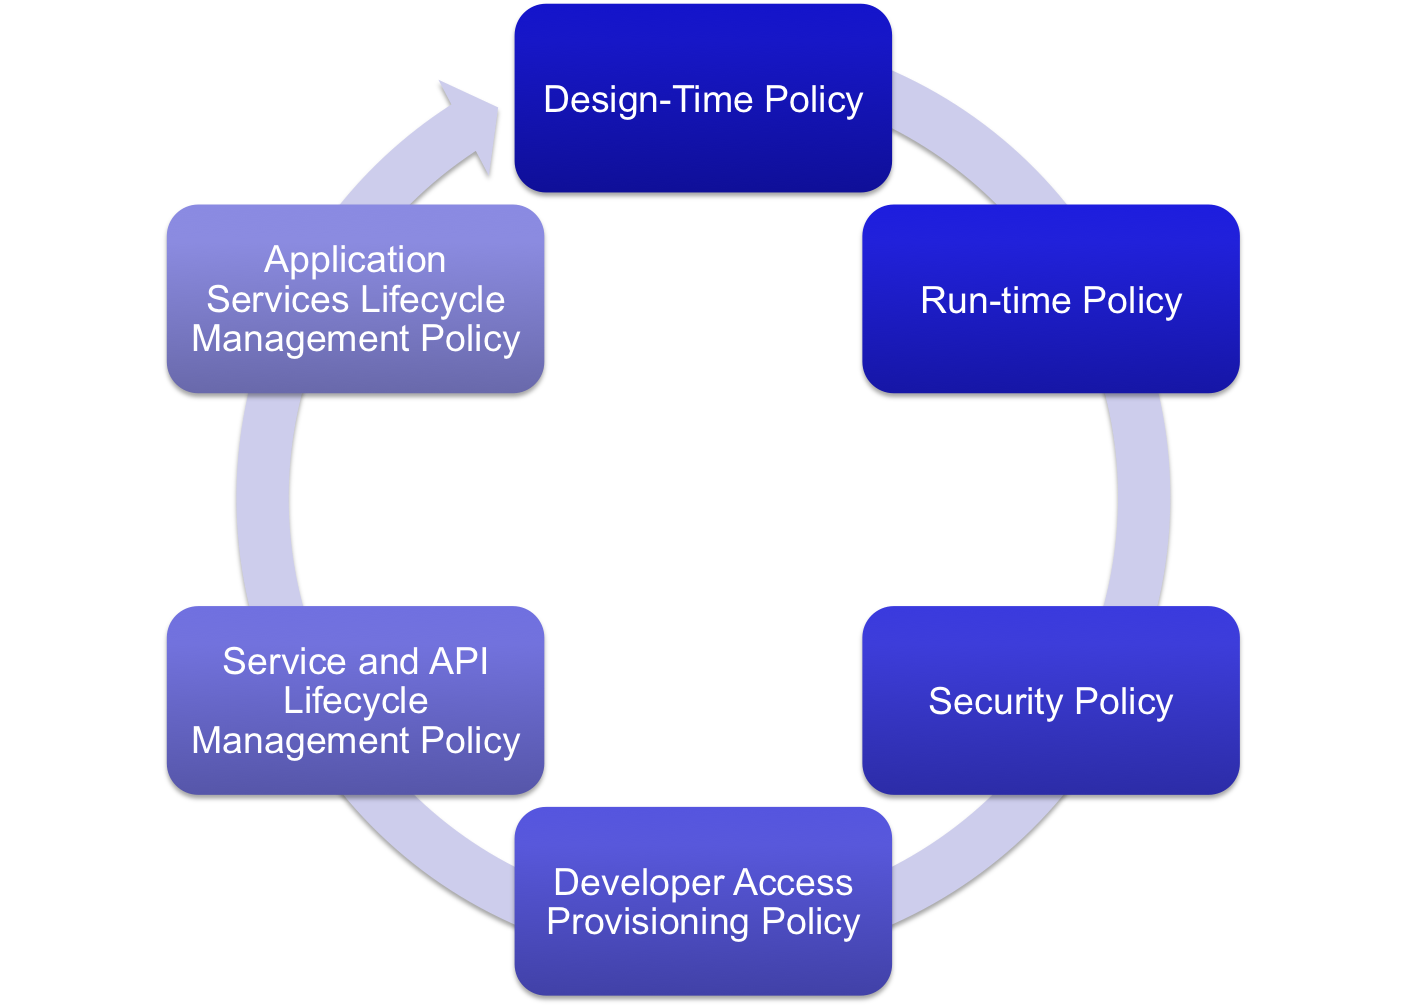 Policy Categories